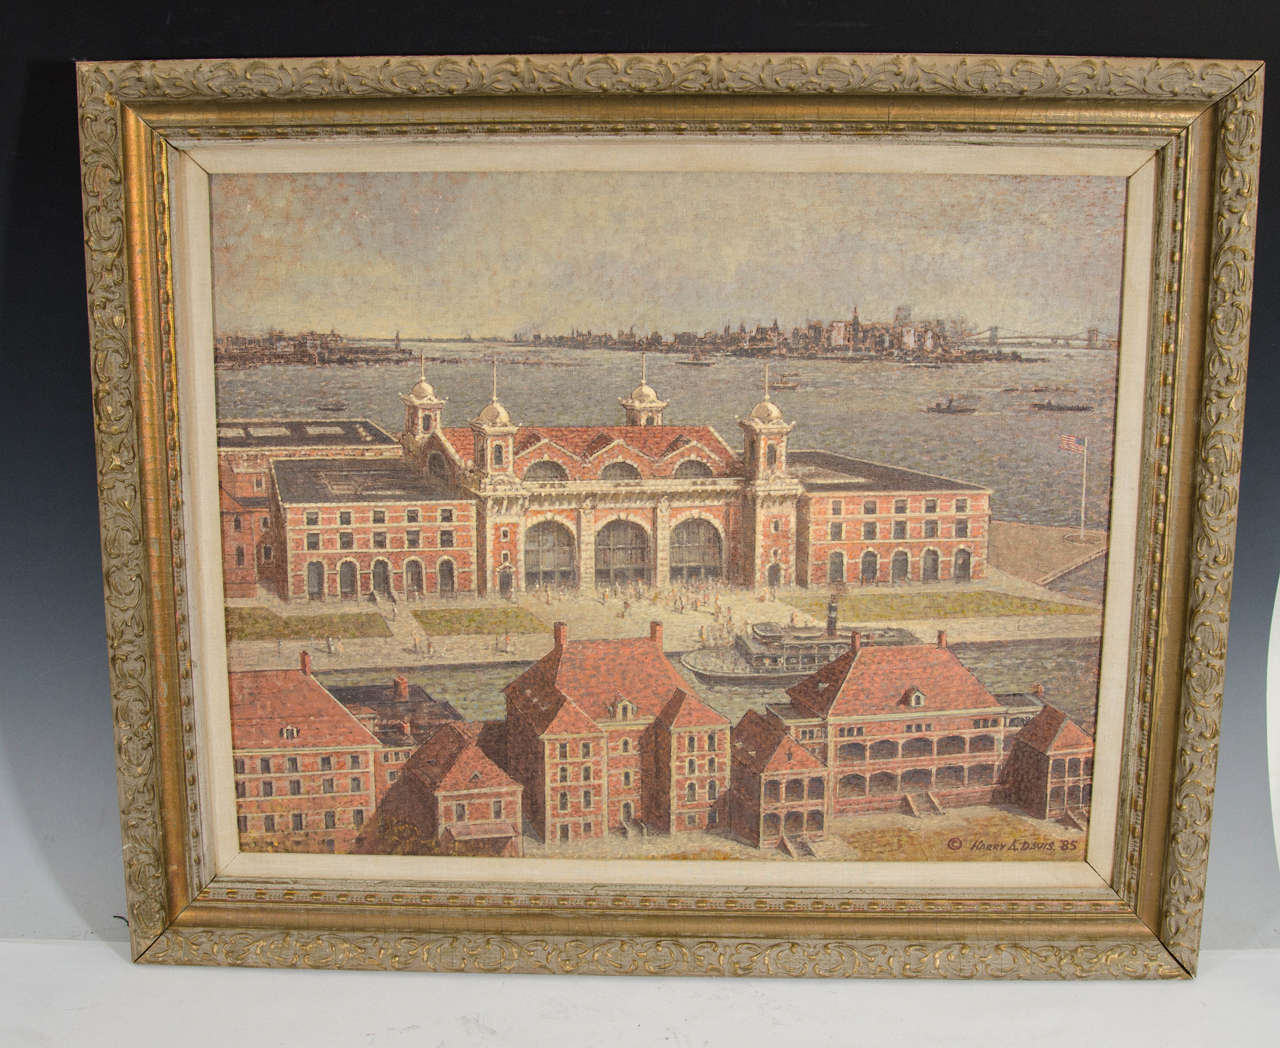 A painting by artist Harry K. Davis of Ellis Island, signed and dated 1985.

Reduced from: $3,900